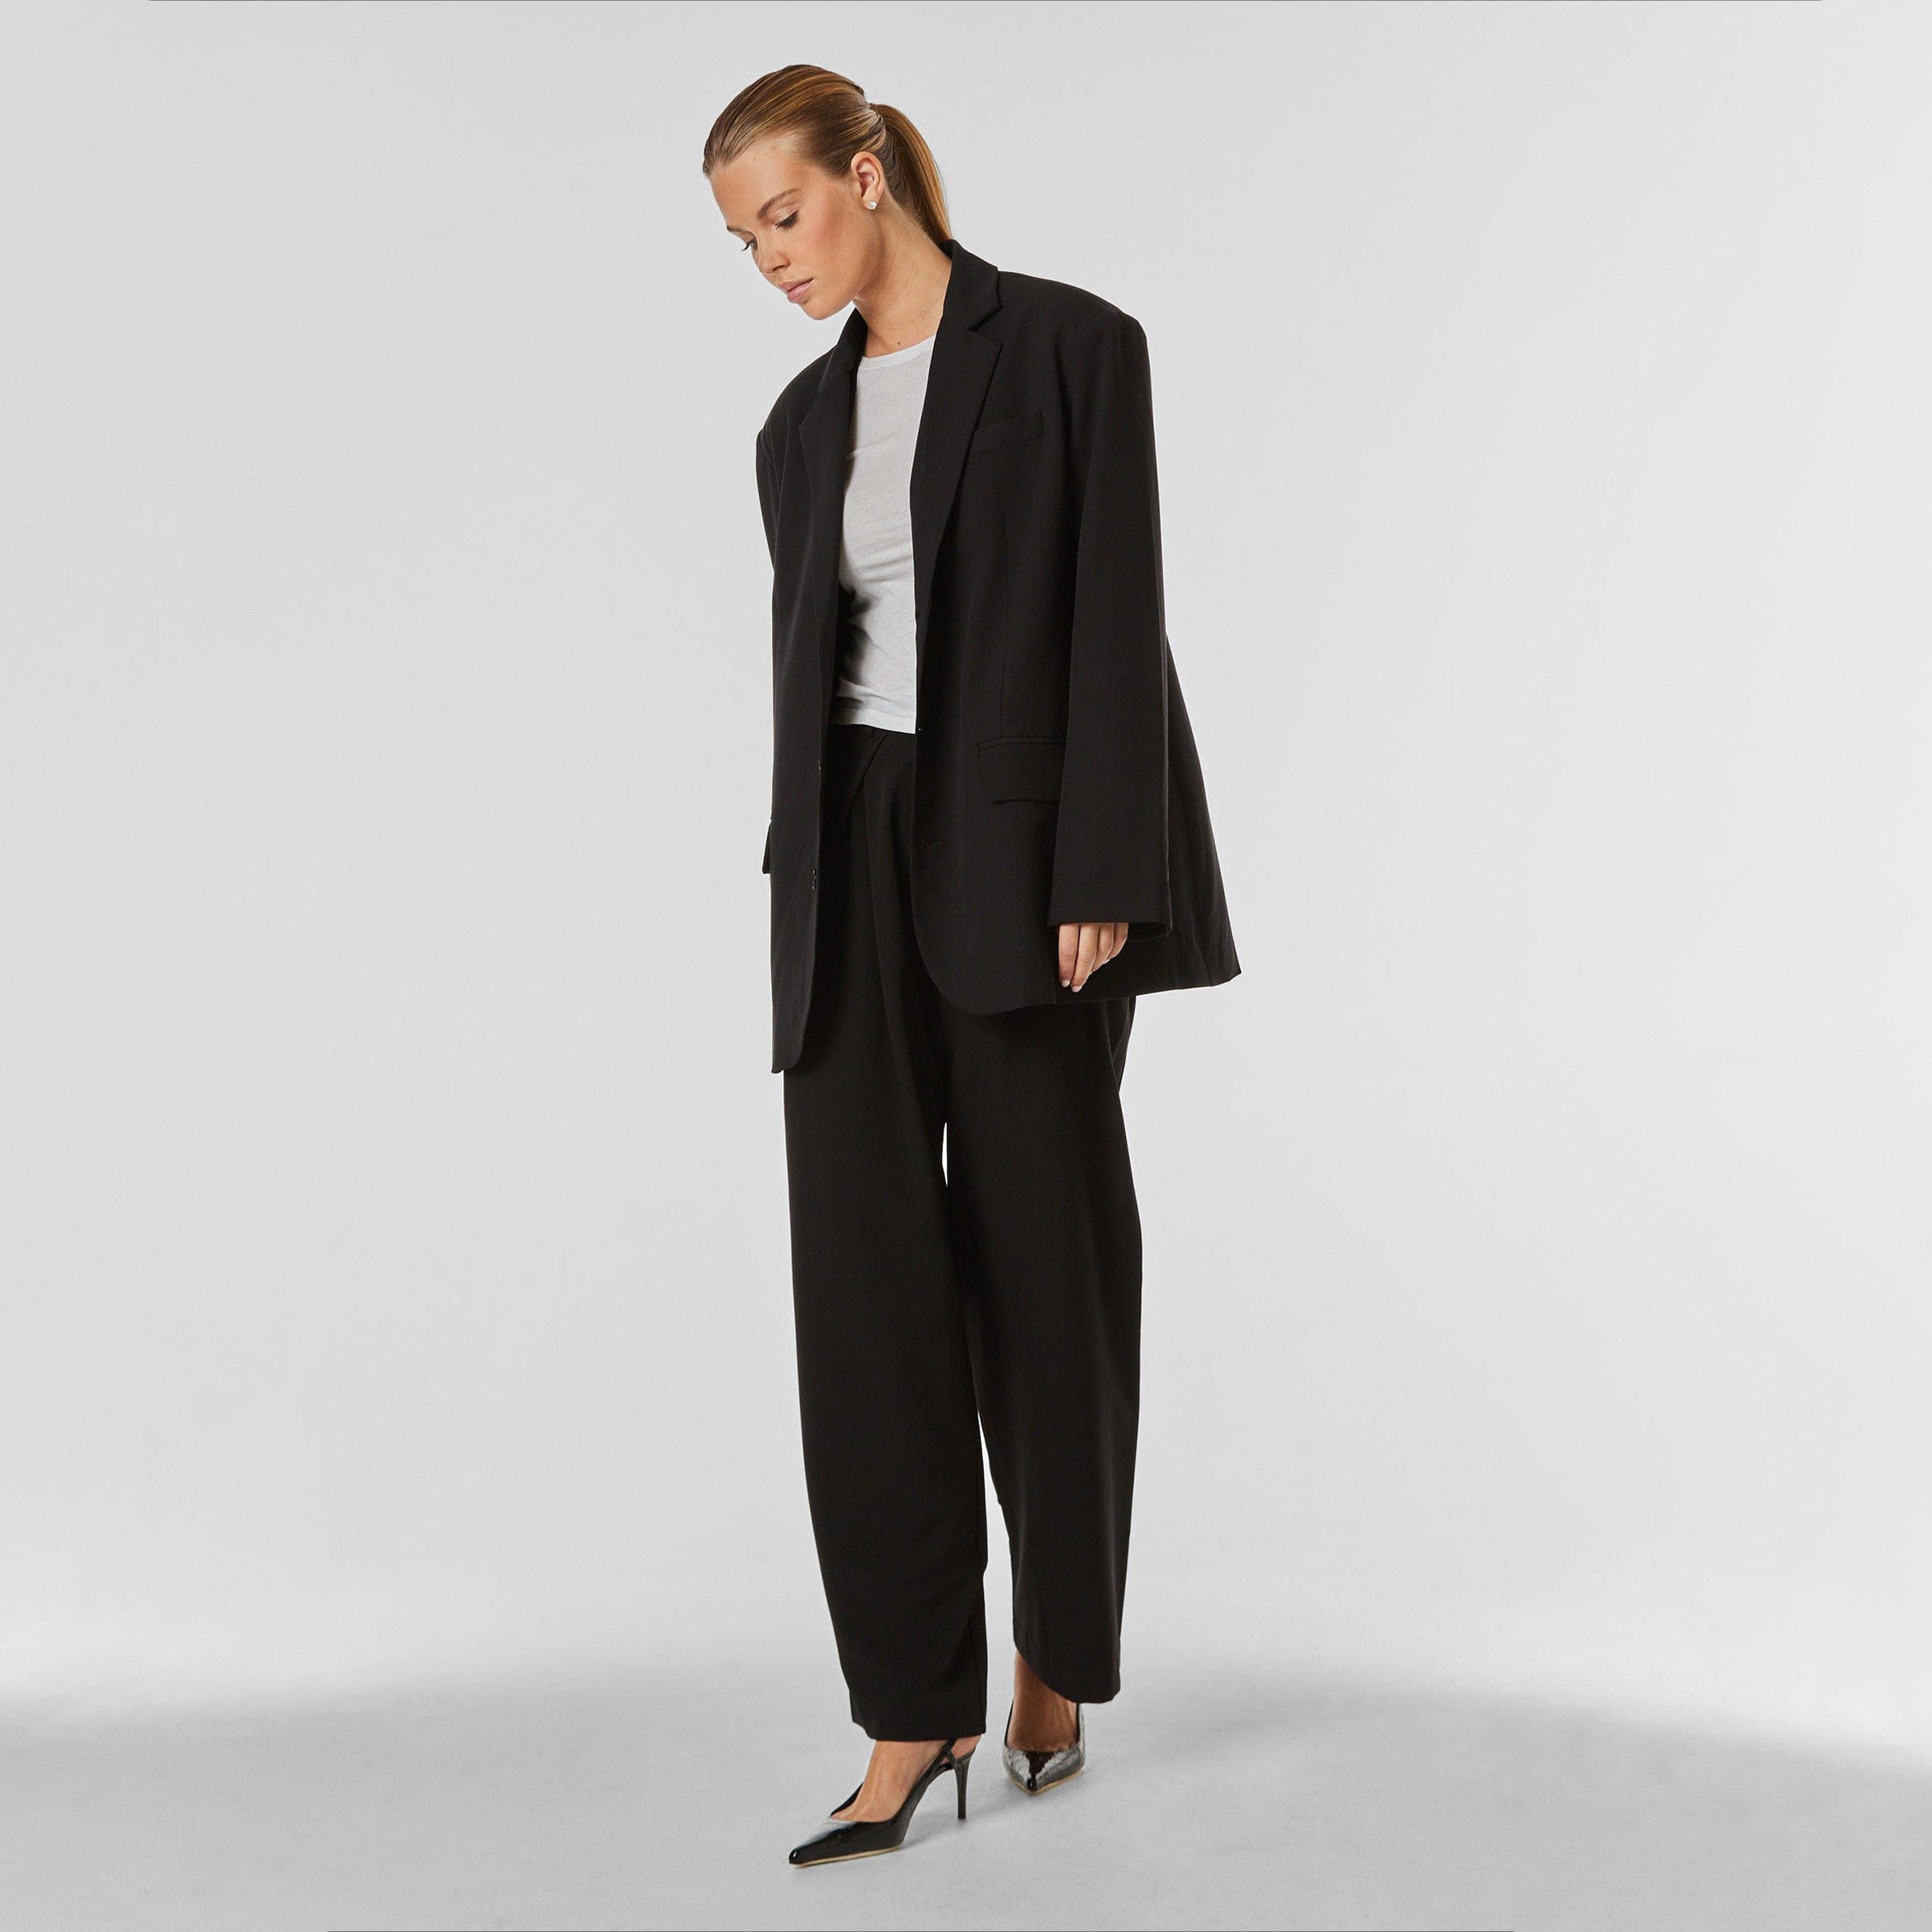 Full body view of woman wearing oversized black blazer and black trouser.